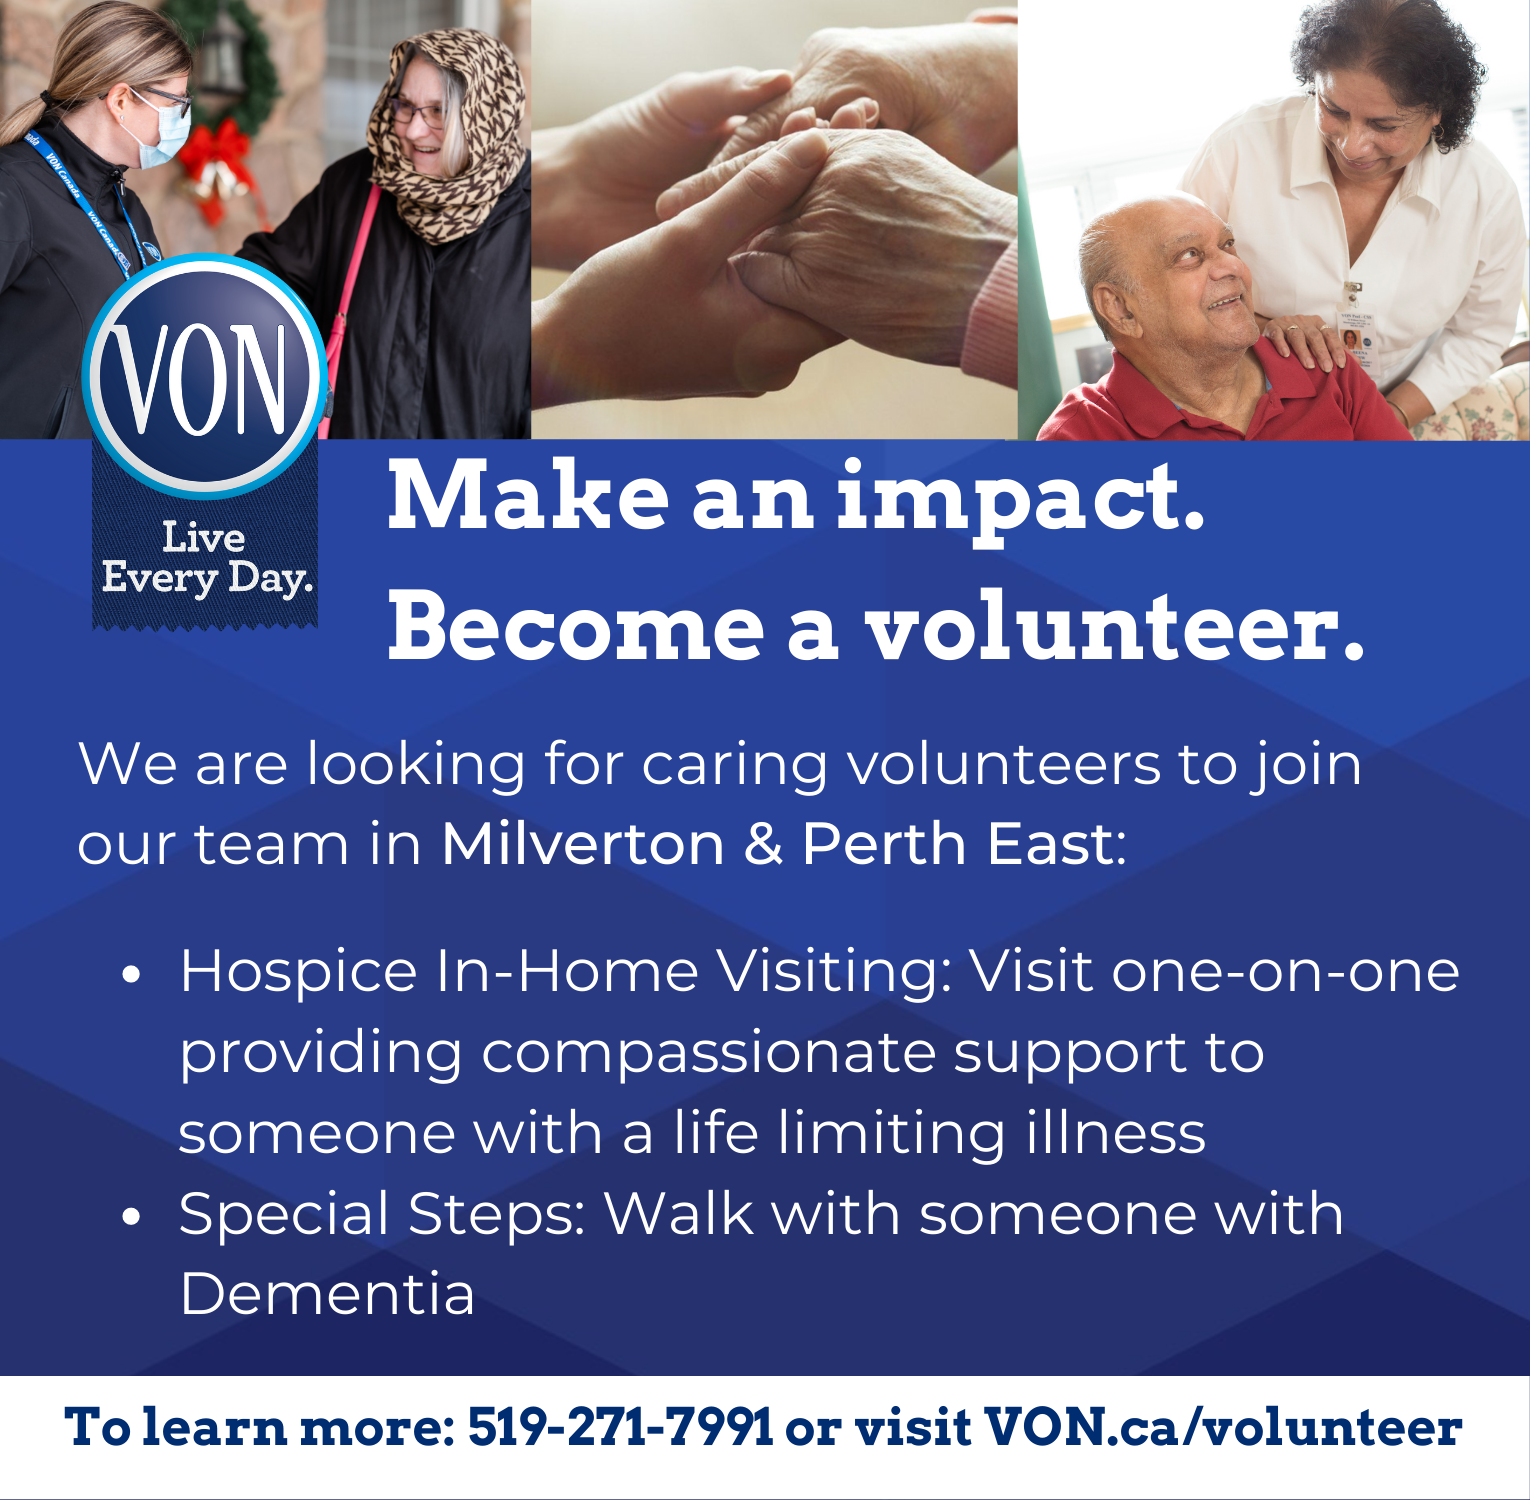 VON Make an impact. Become a volunteer. We are looking for caring volunteers to join our team in Milverton and Perth East: Hospice and in home visting and special steps (walk with something with dementia)